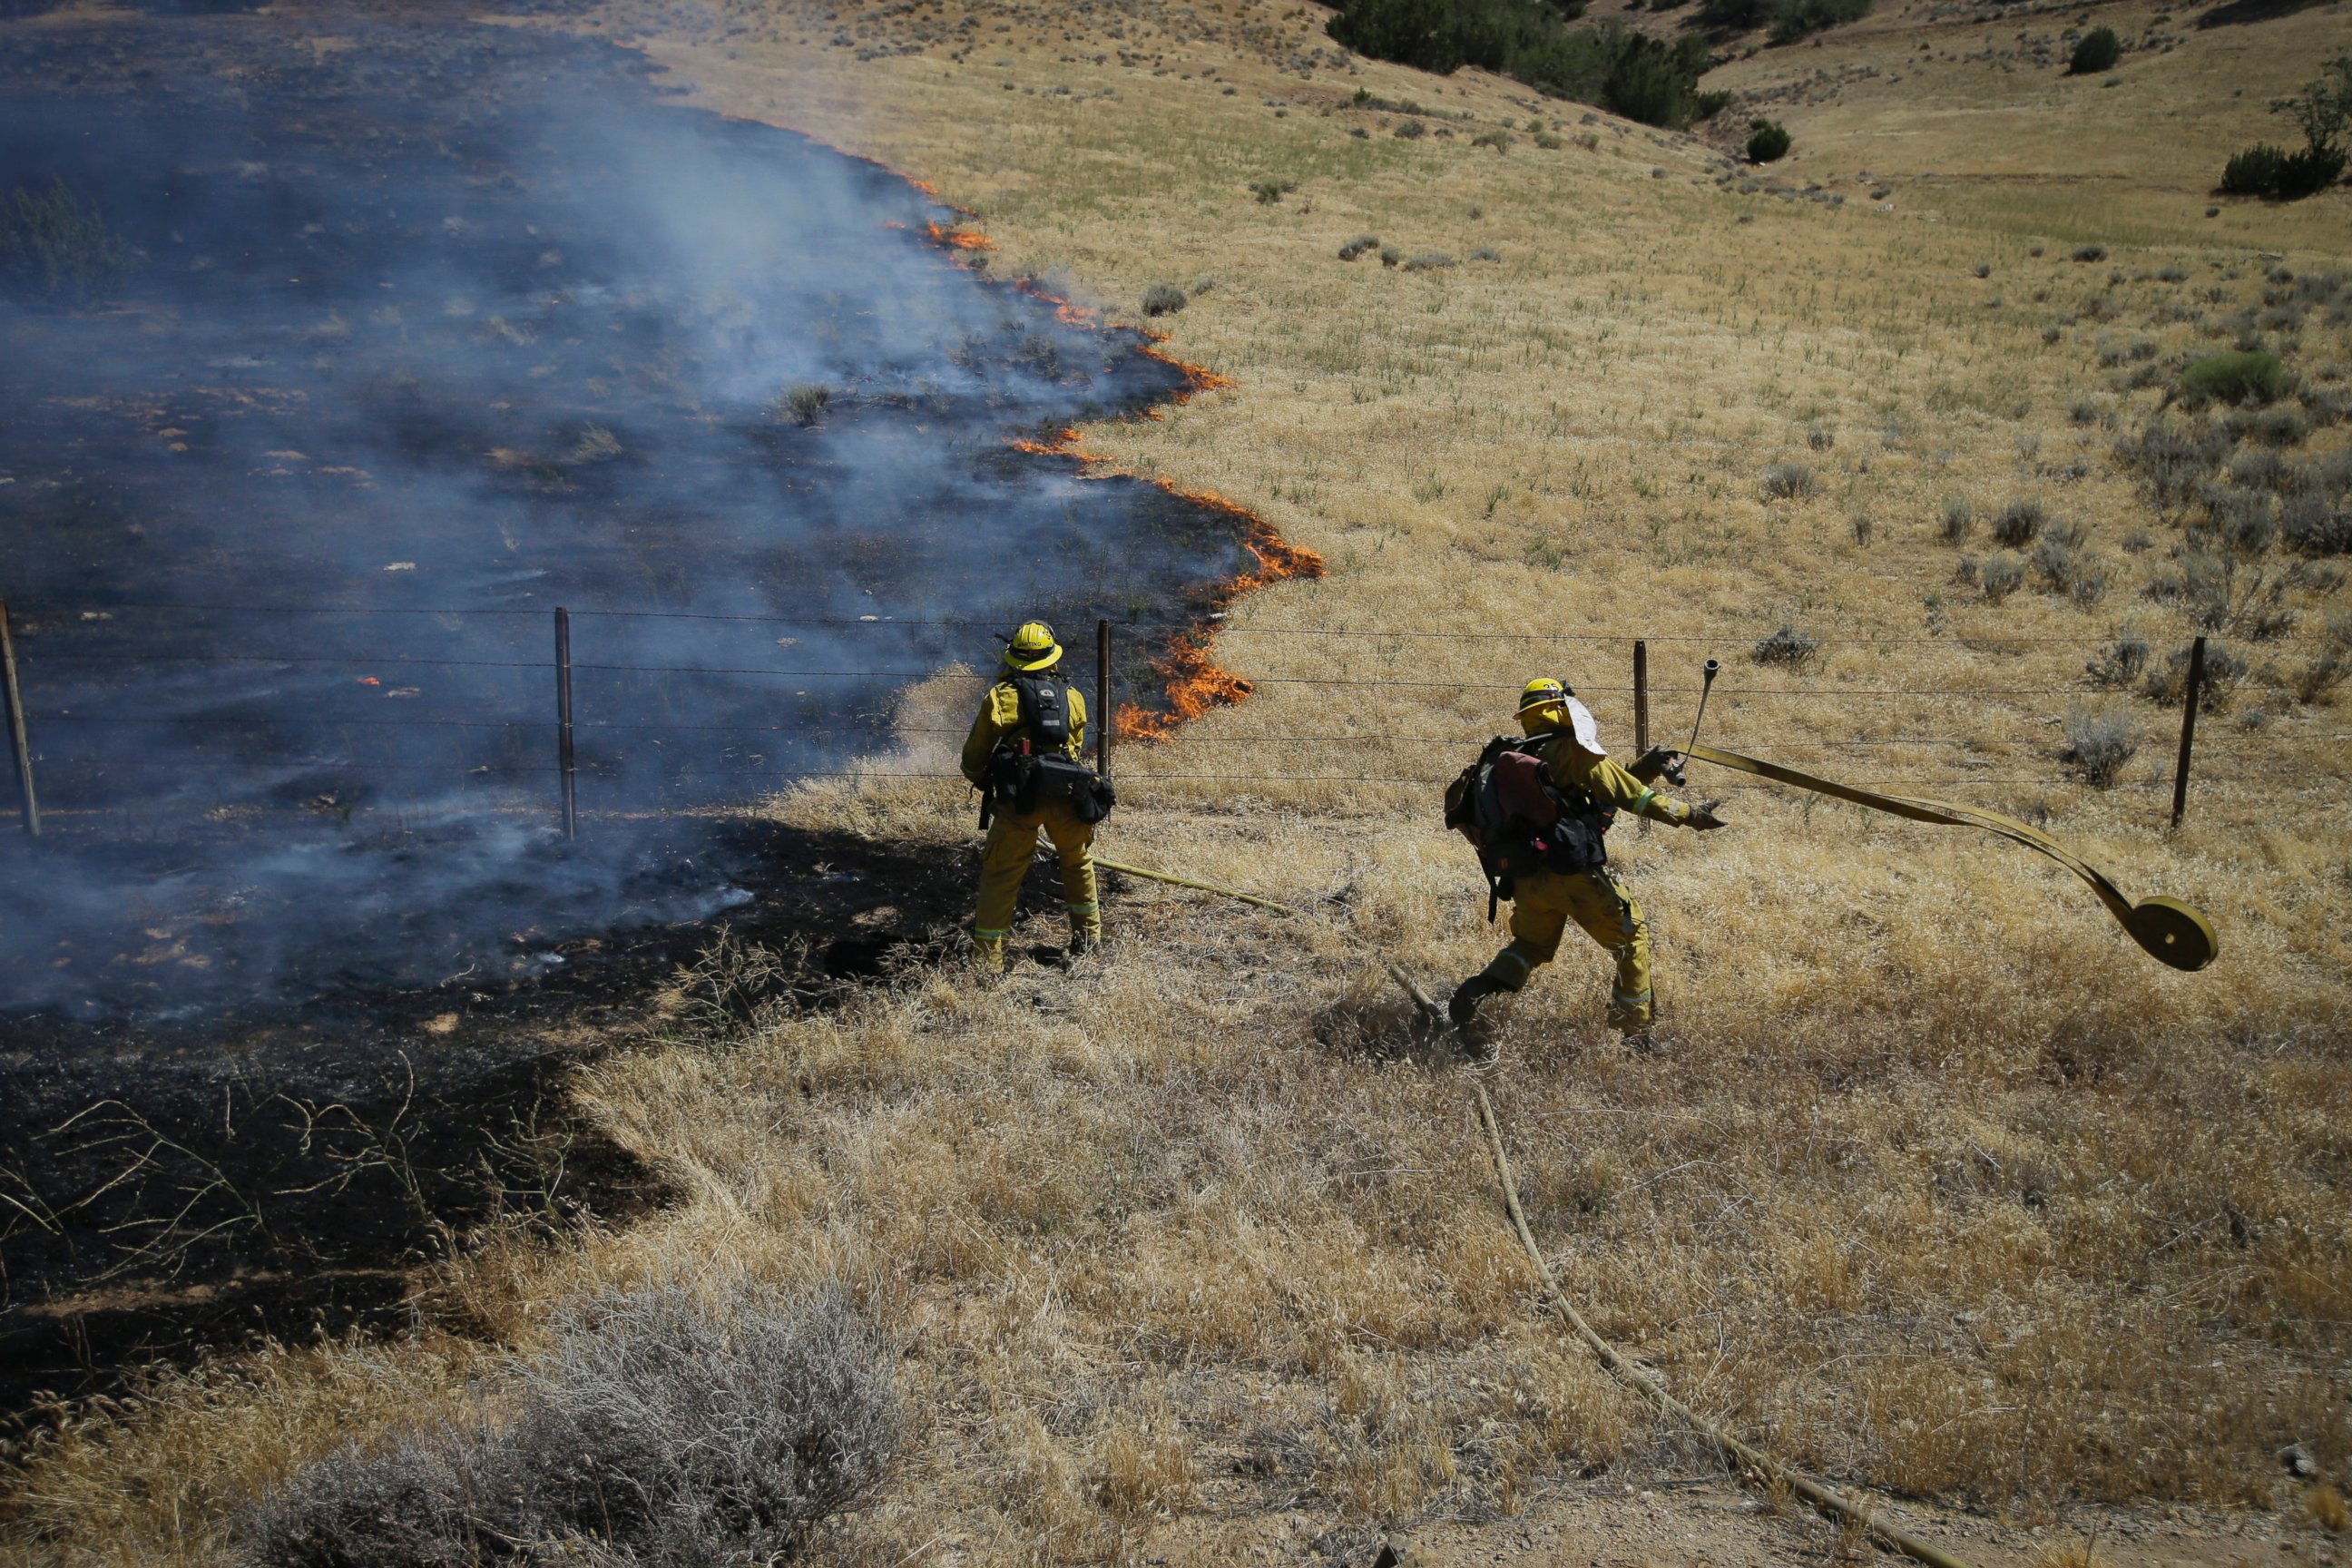 PHOTO: Firefighters prepare water hoses to battle a wildfire burning along Highway 178 near Lake Isabella, Calif., June 24, 2016.